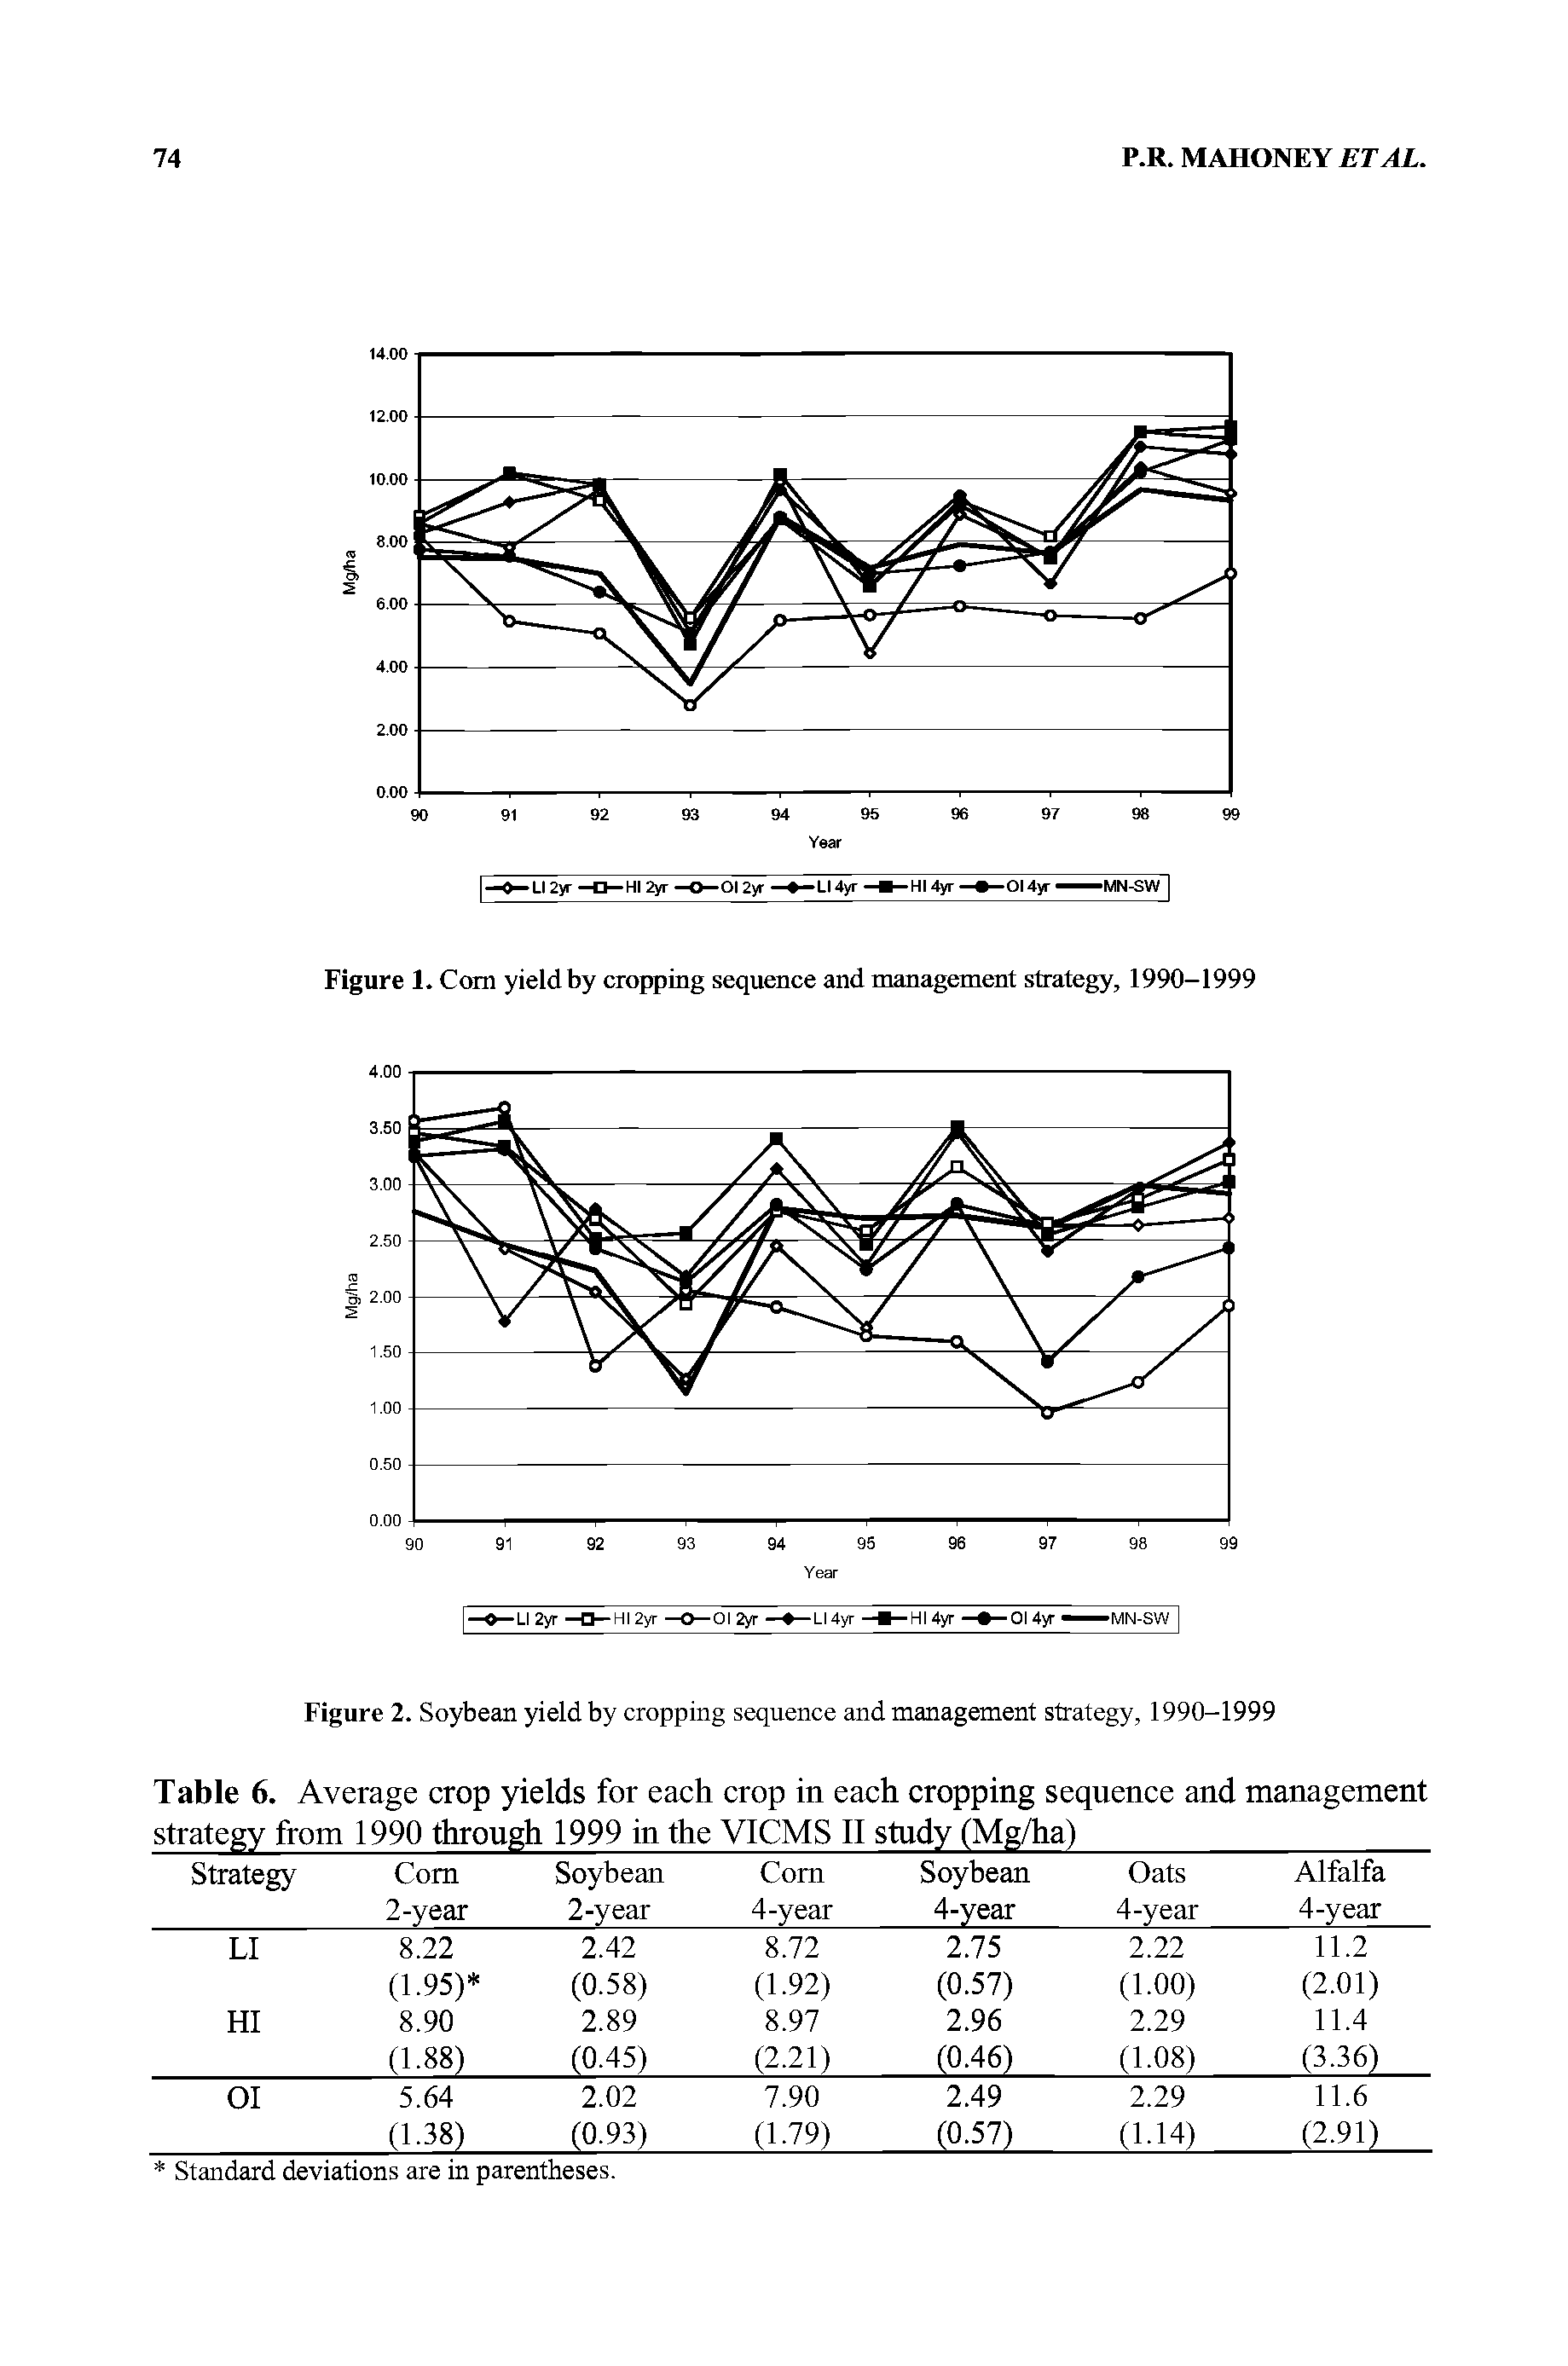 Figure 1. Com yield by cropping sequence and management strategy, 1990-1999...